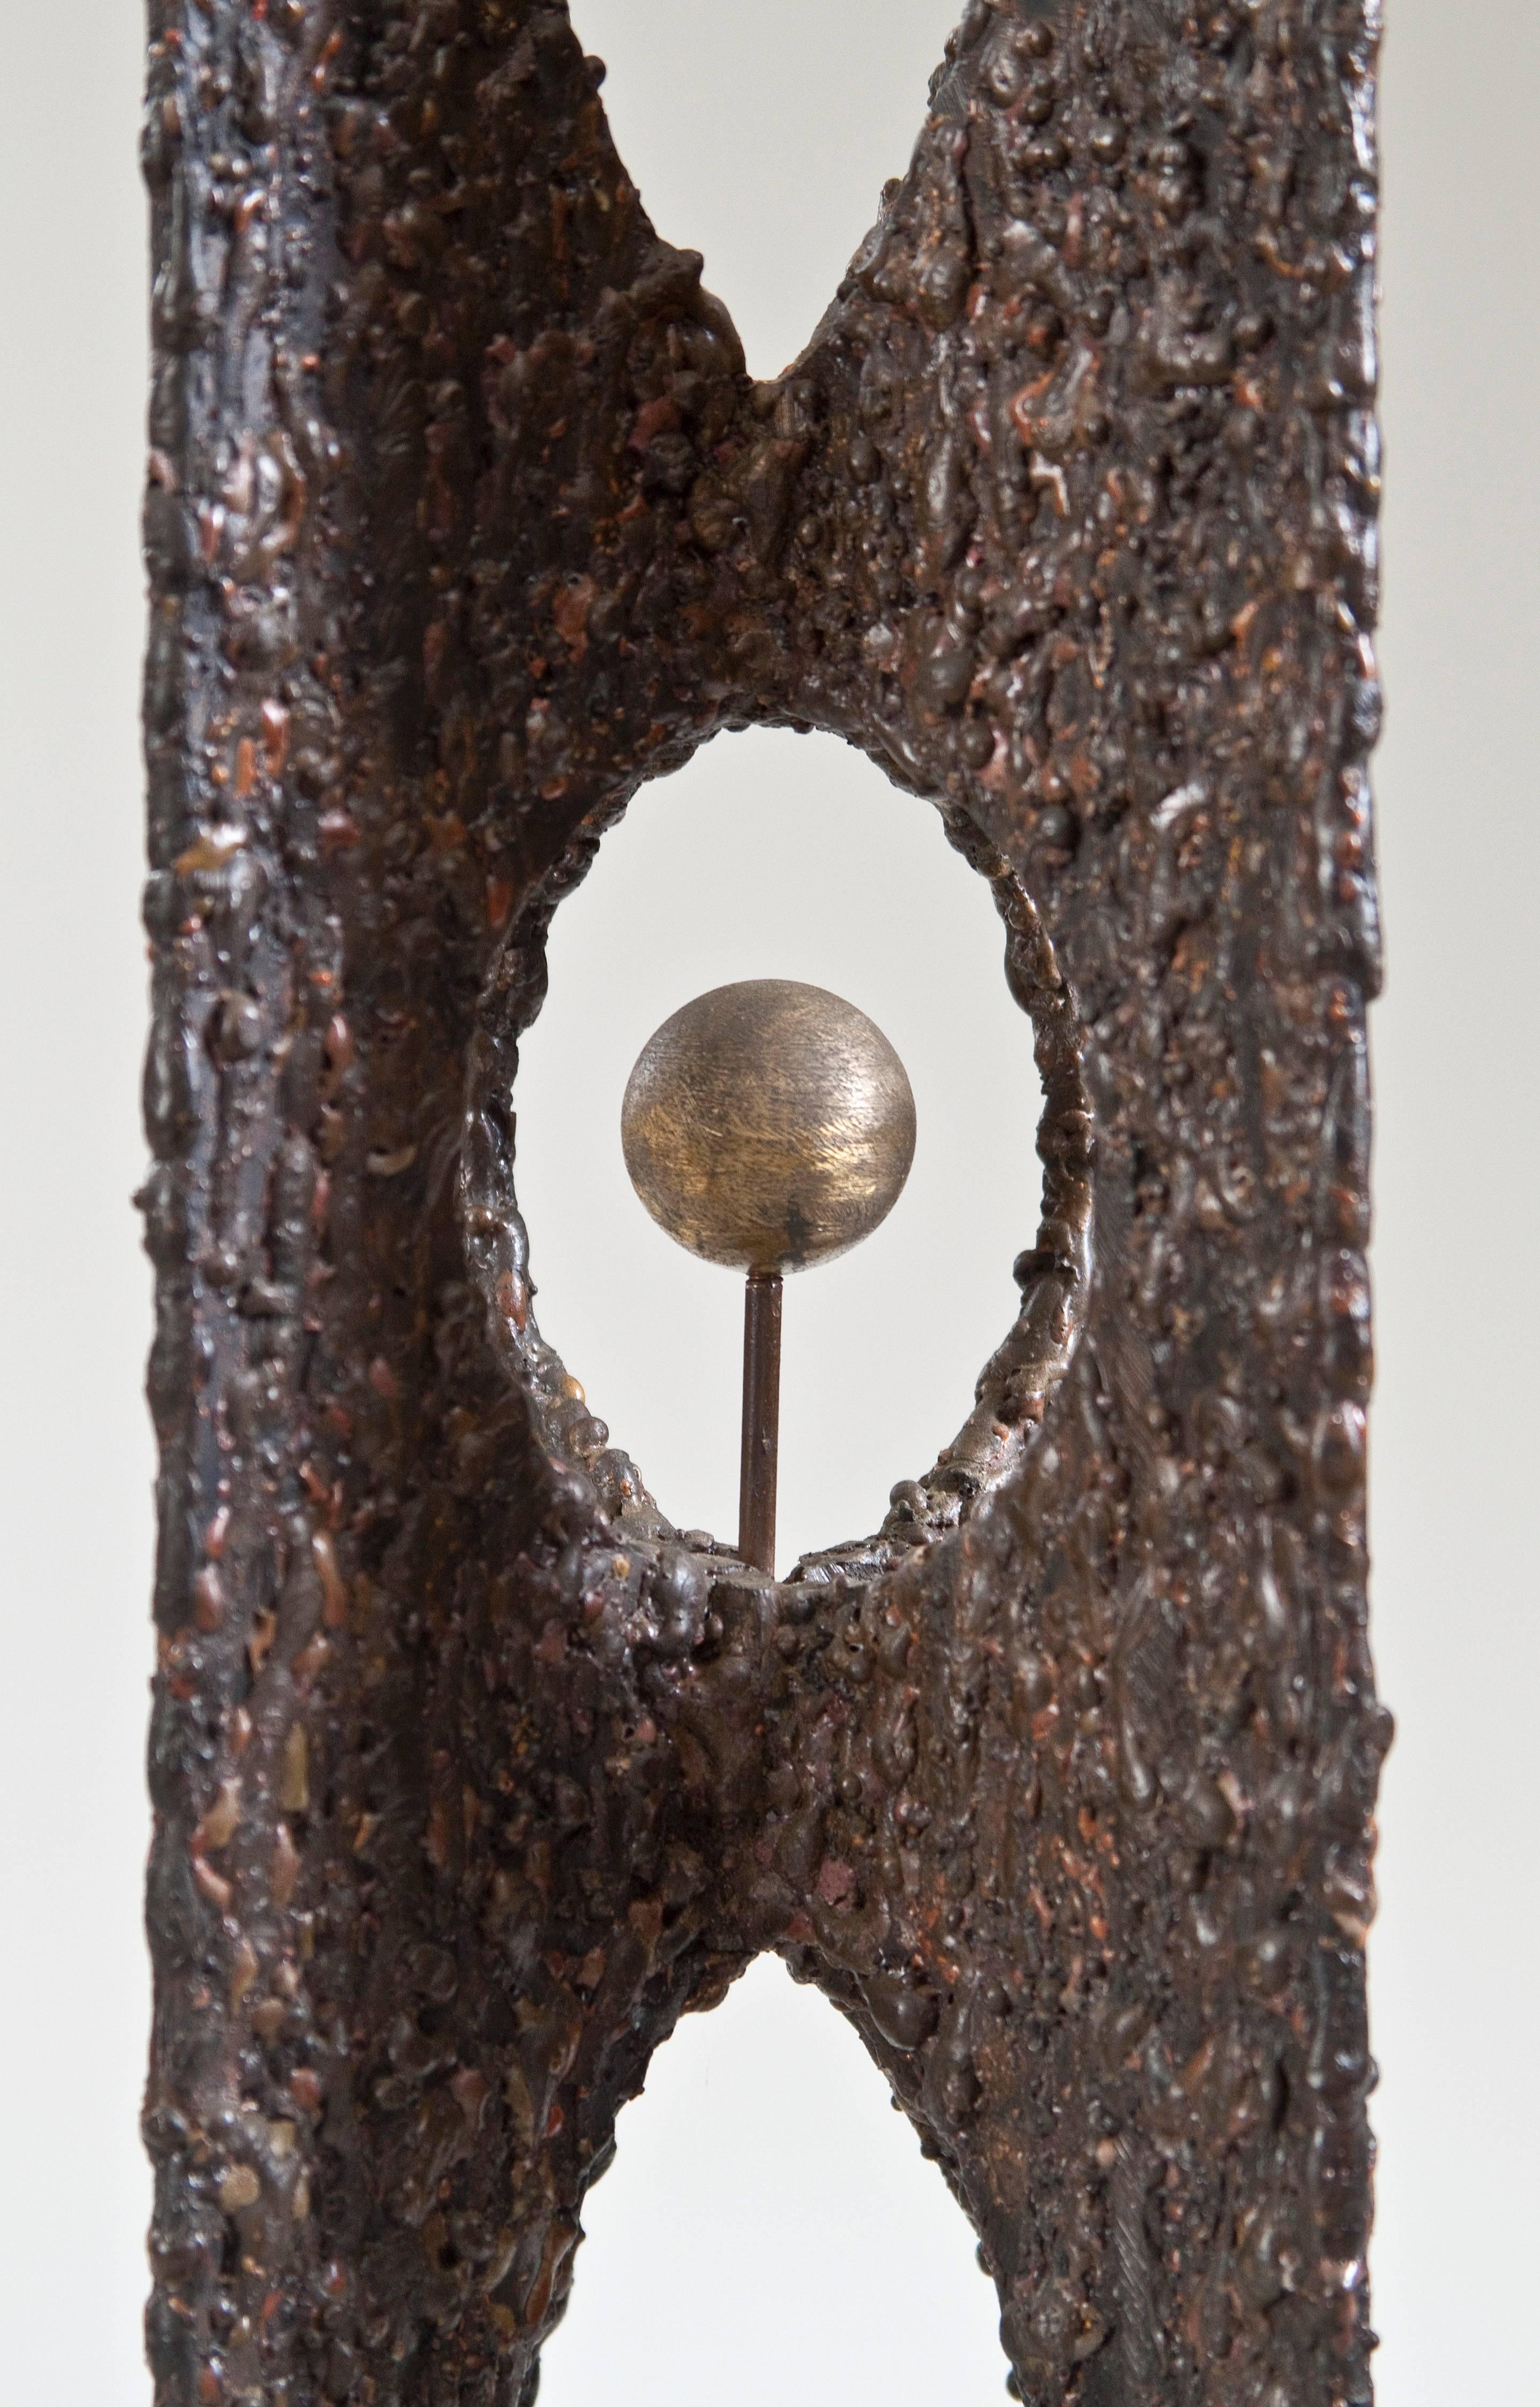 Raymond Granville Barger, American Abstract Bronze Sculpture
The four vertical elements joined to create an ellipital recess centering a polished brass sphere, of textured patinated bronze. Signed: RB 1973

Provenance: Private Collection, New